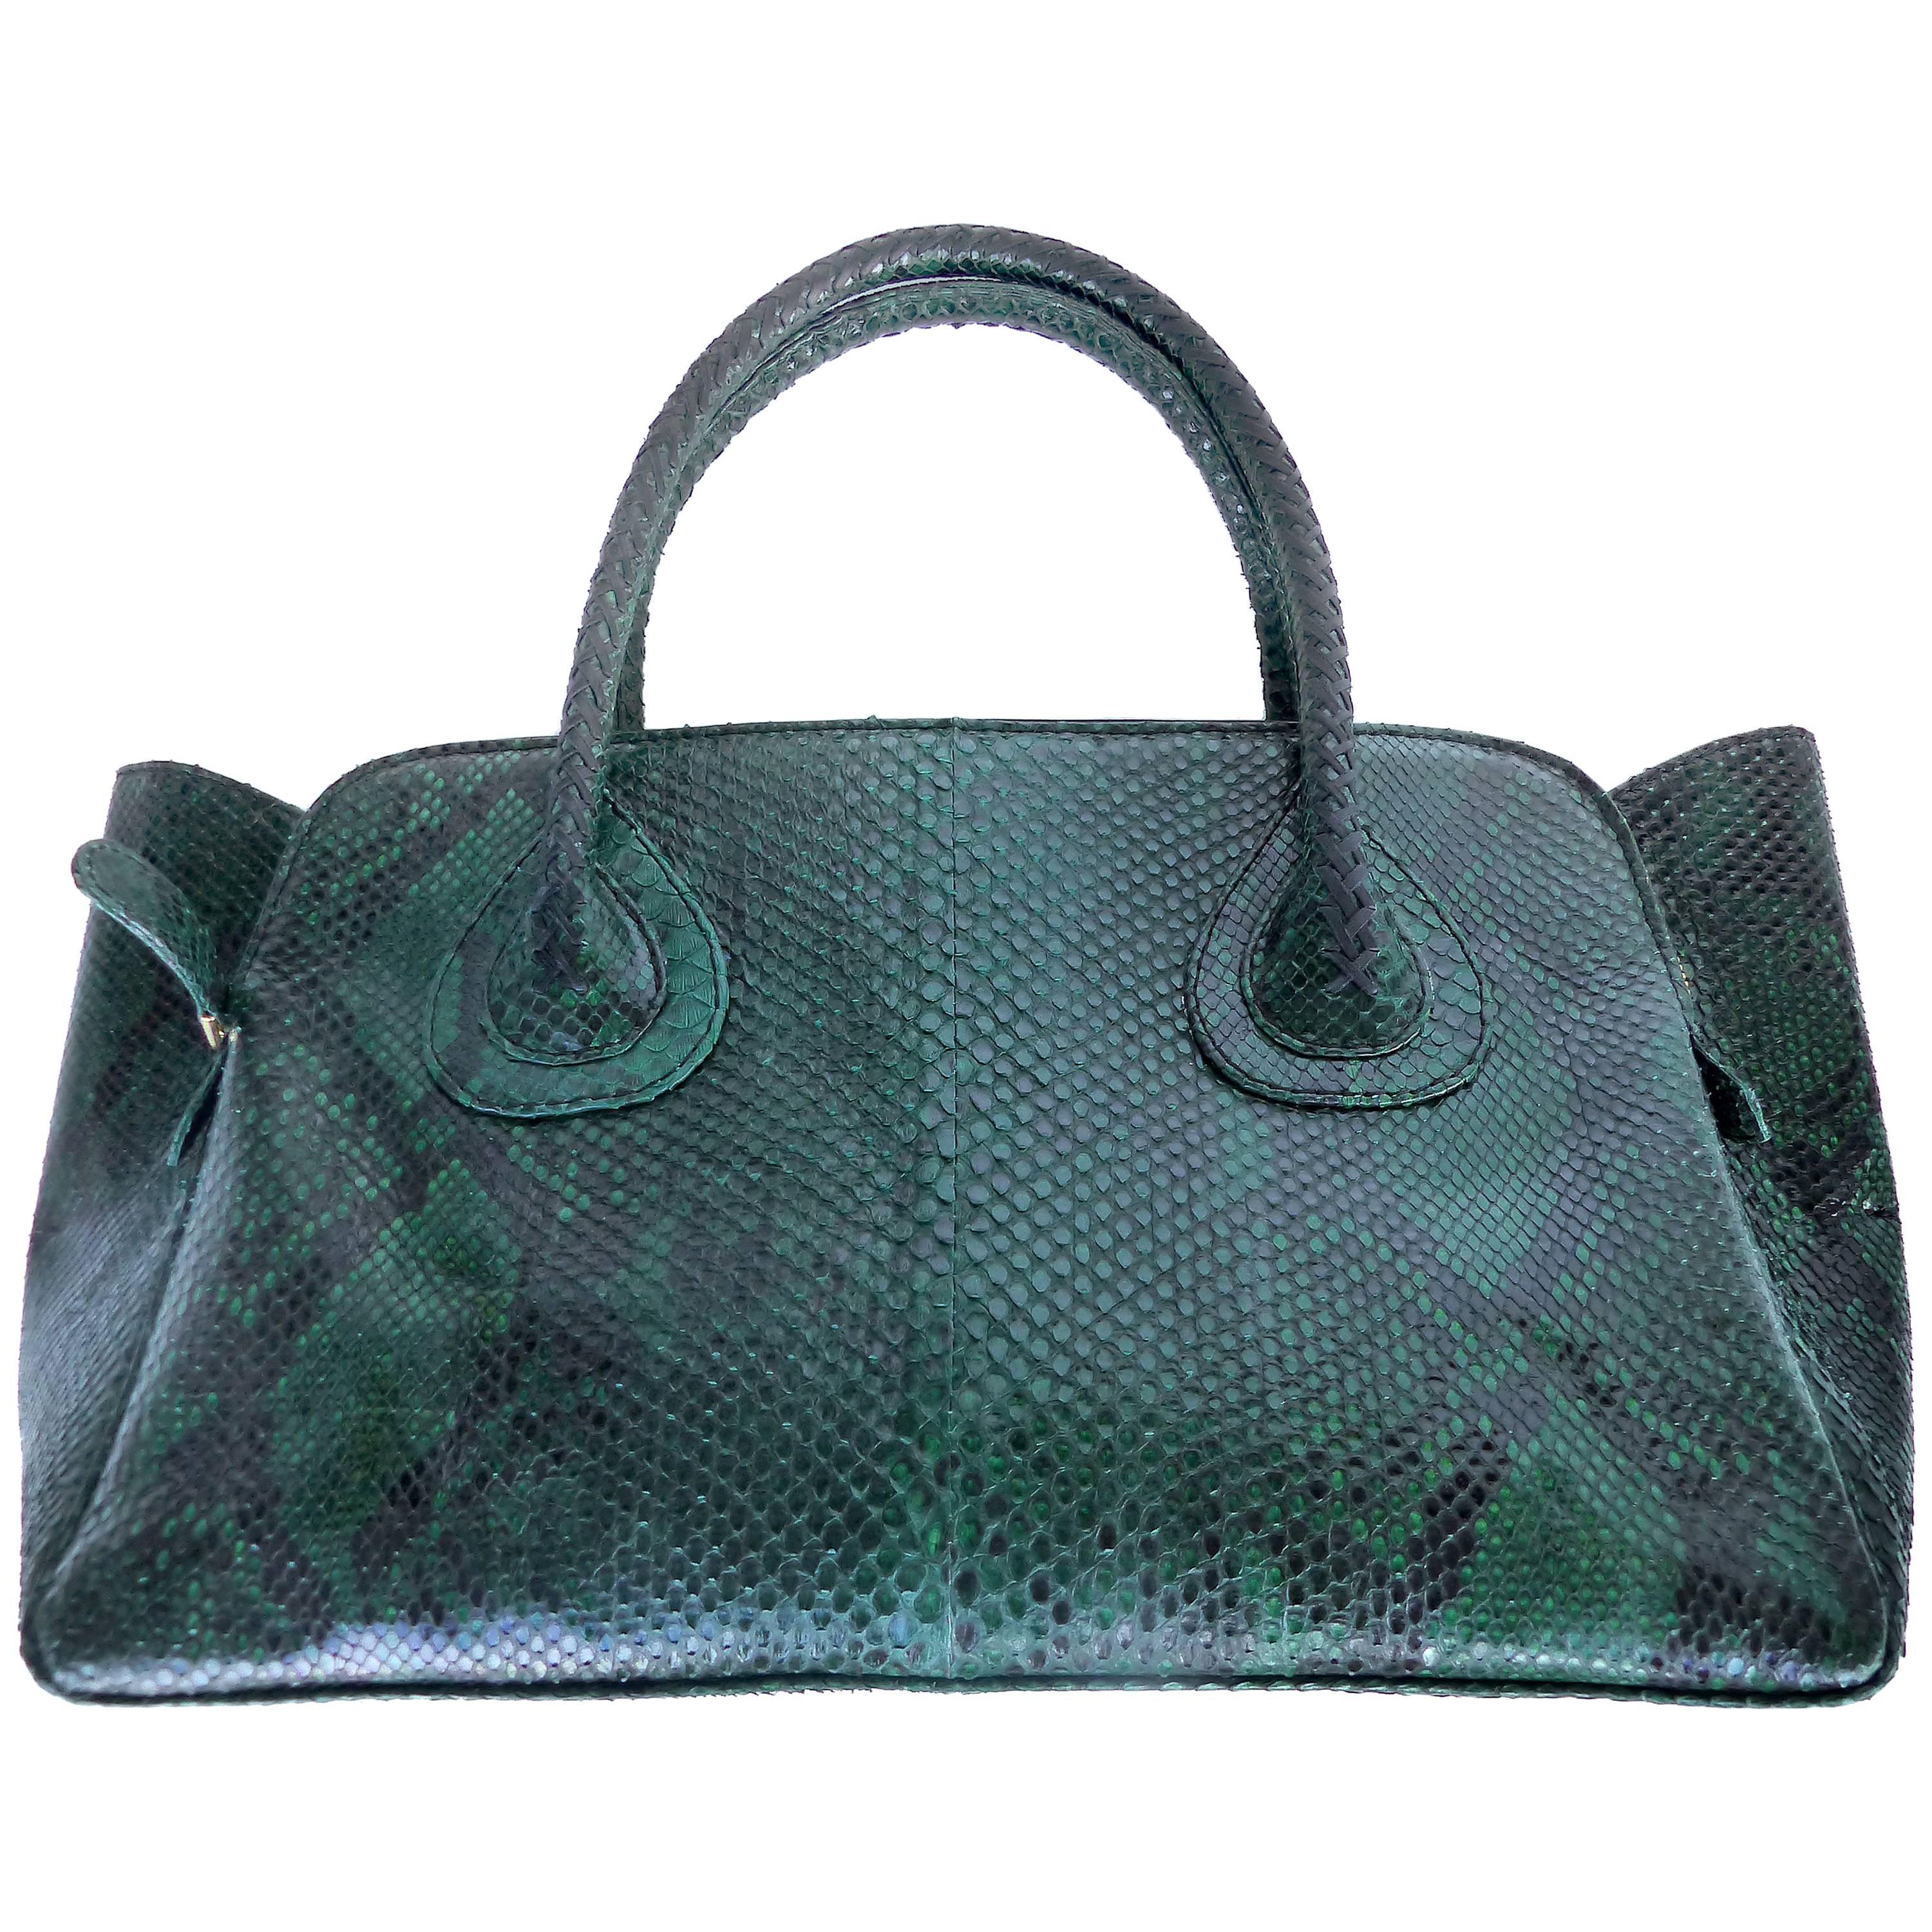 Large "It" Bag in Emerald Green Variegated Python by Glen Arthur For Sale